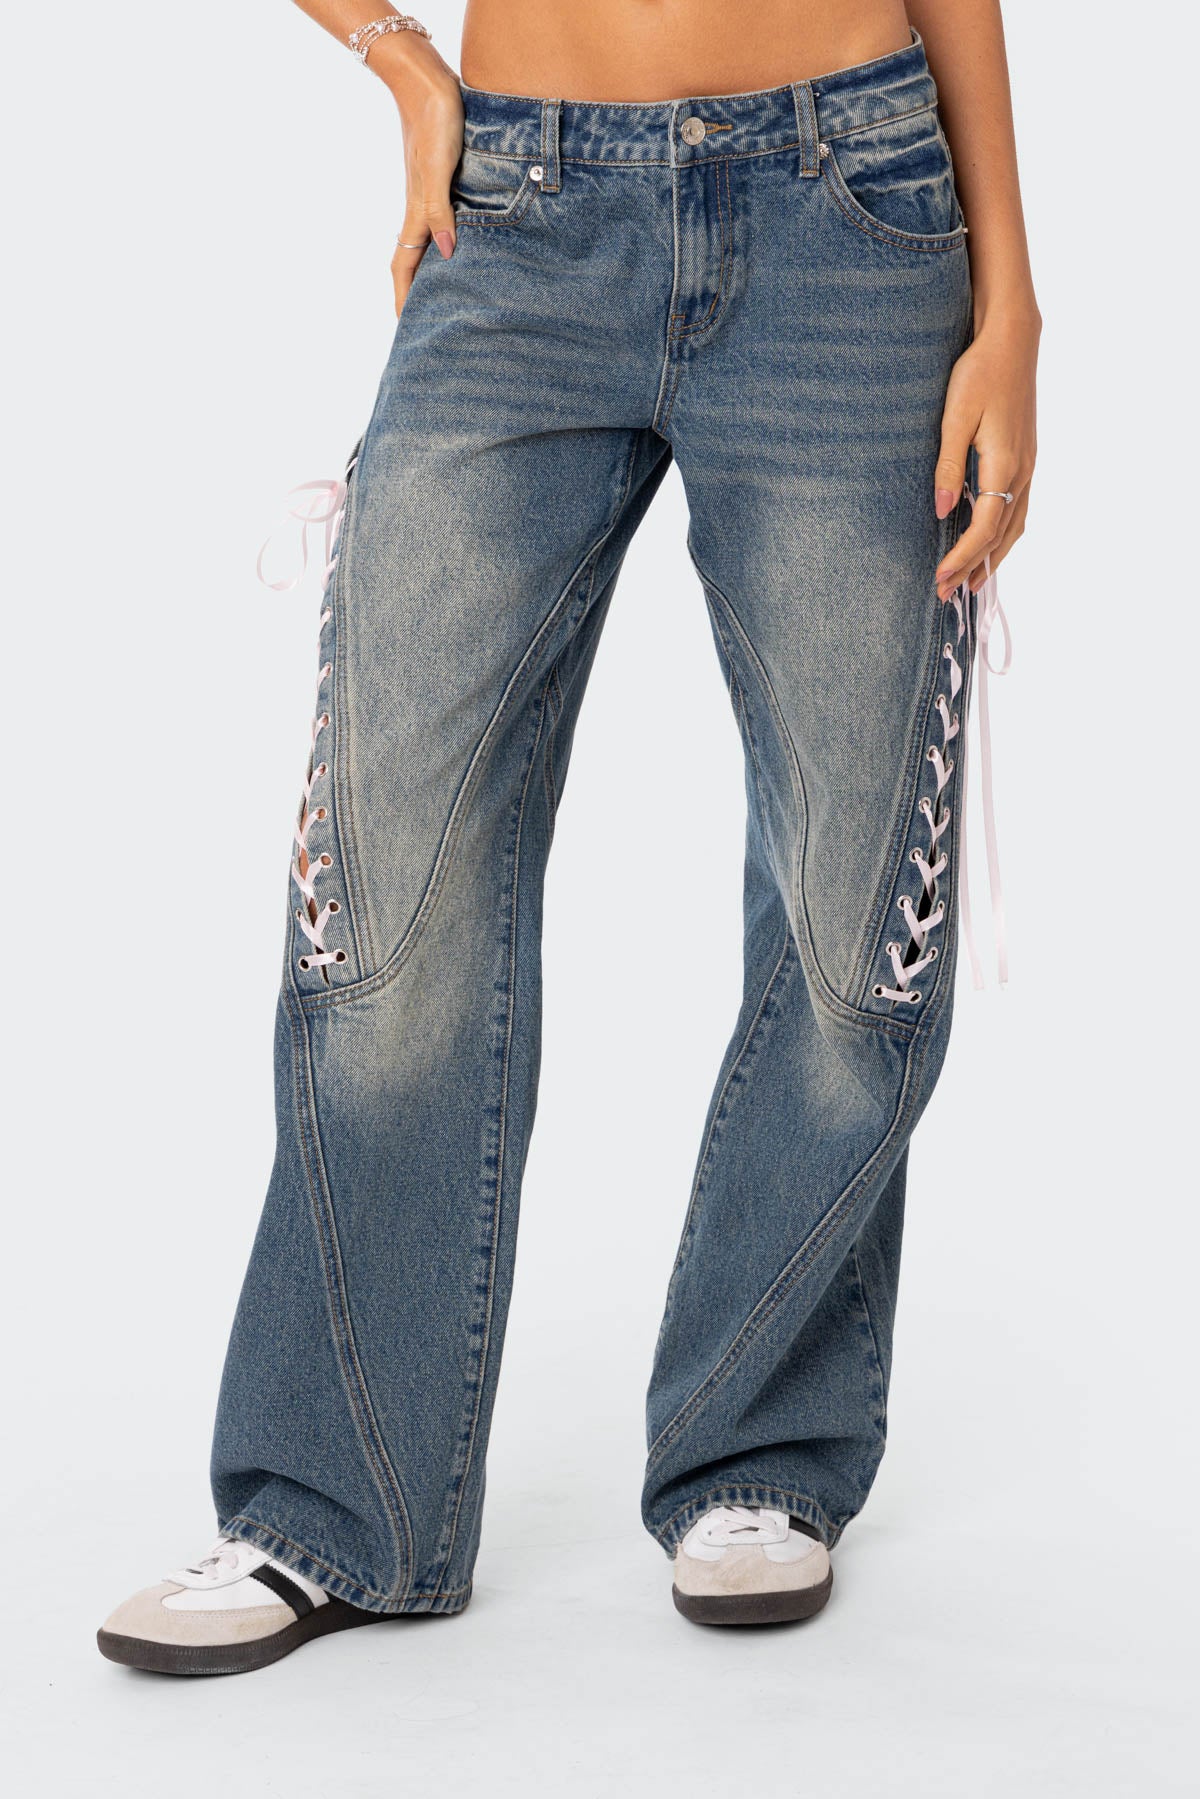 Low Rise Ribbon Lace Up Jeans